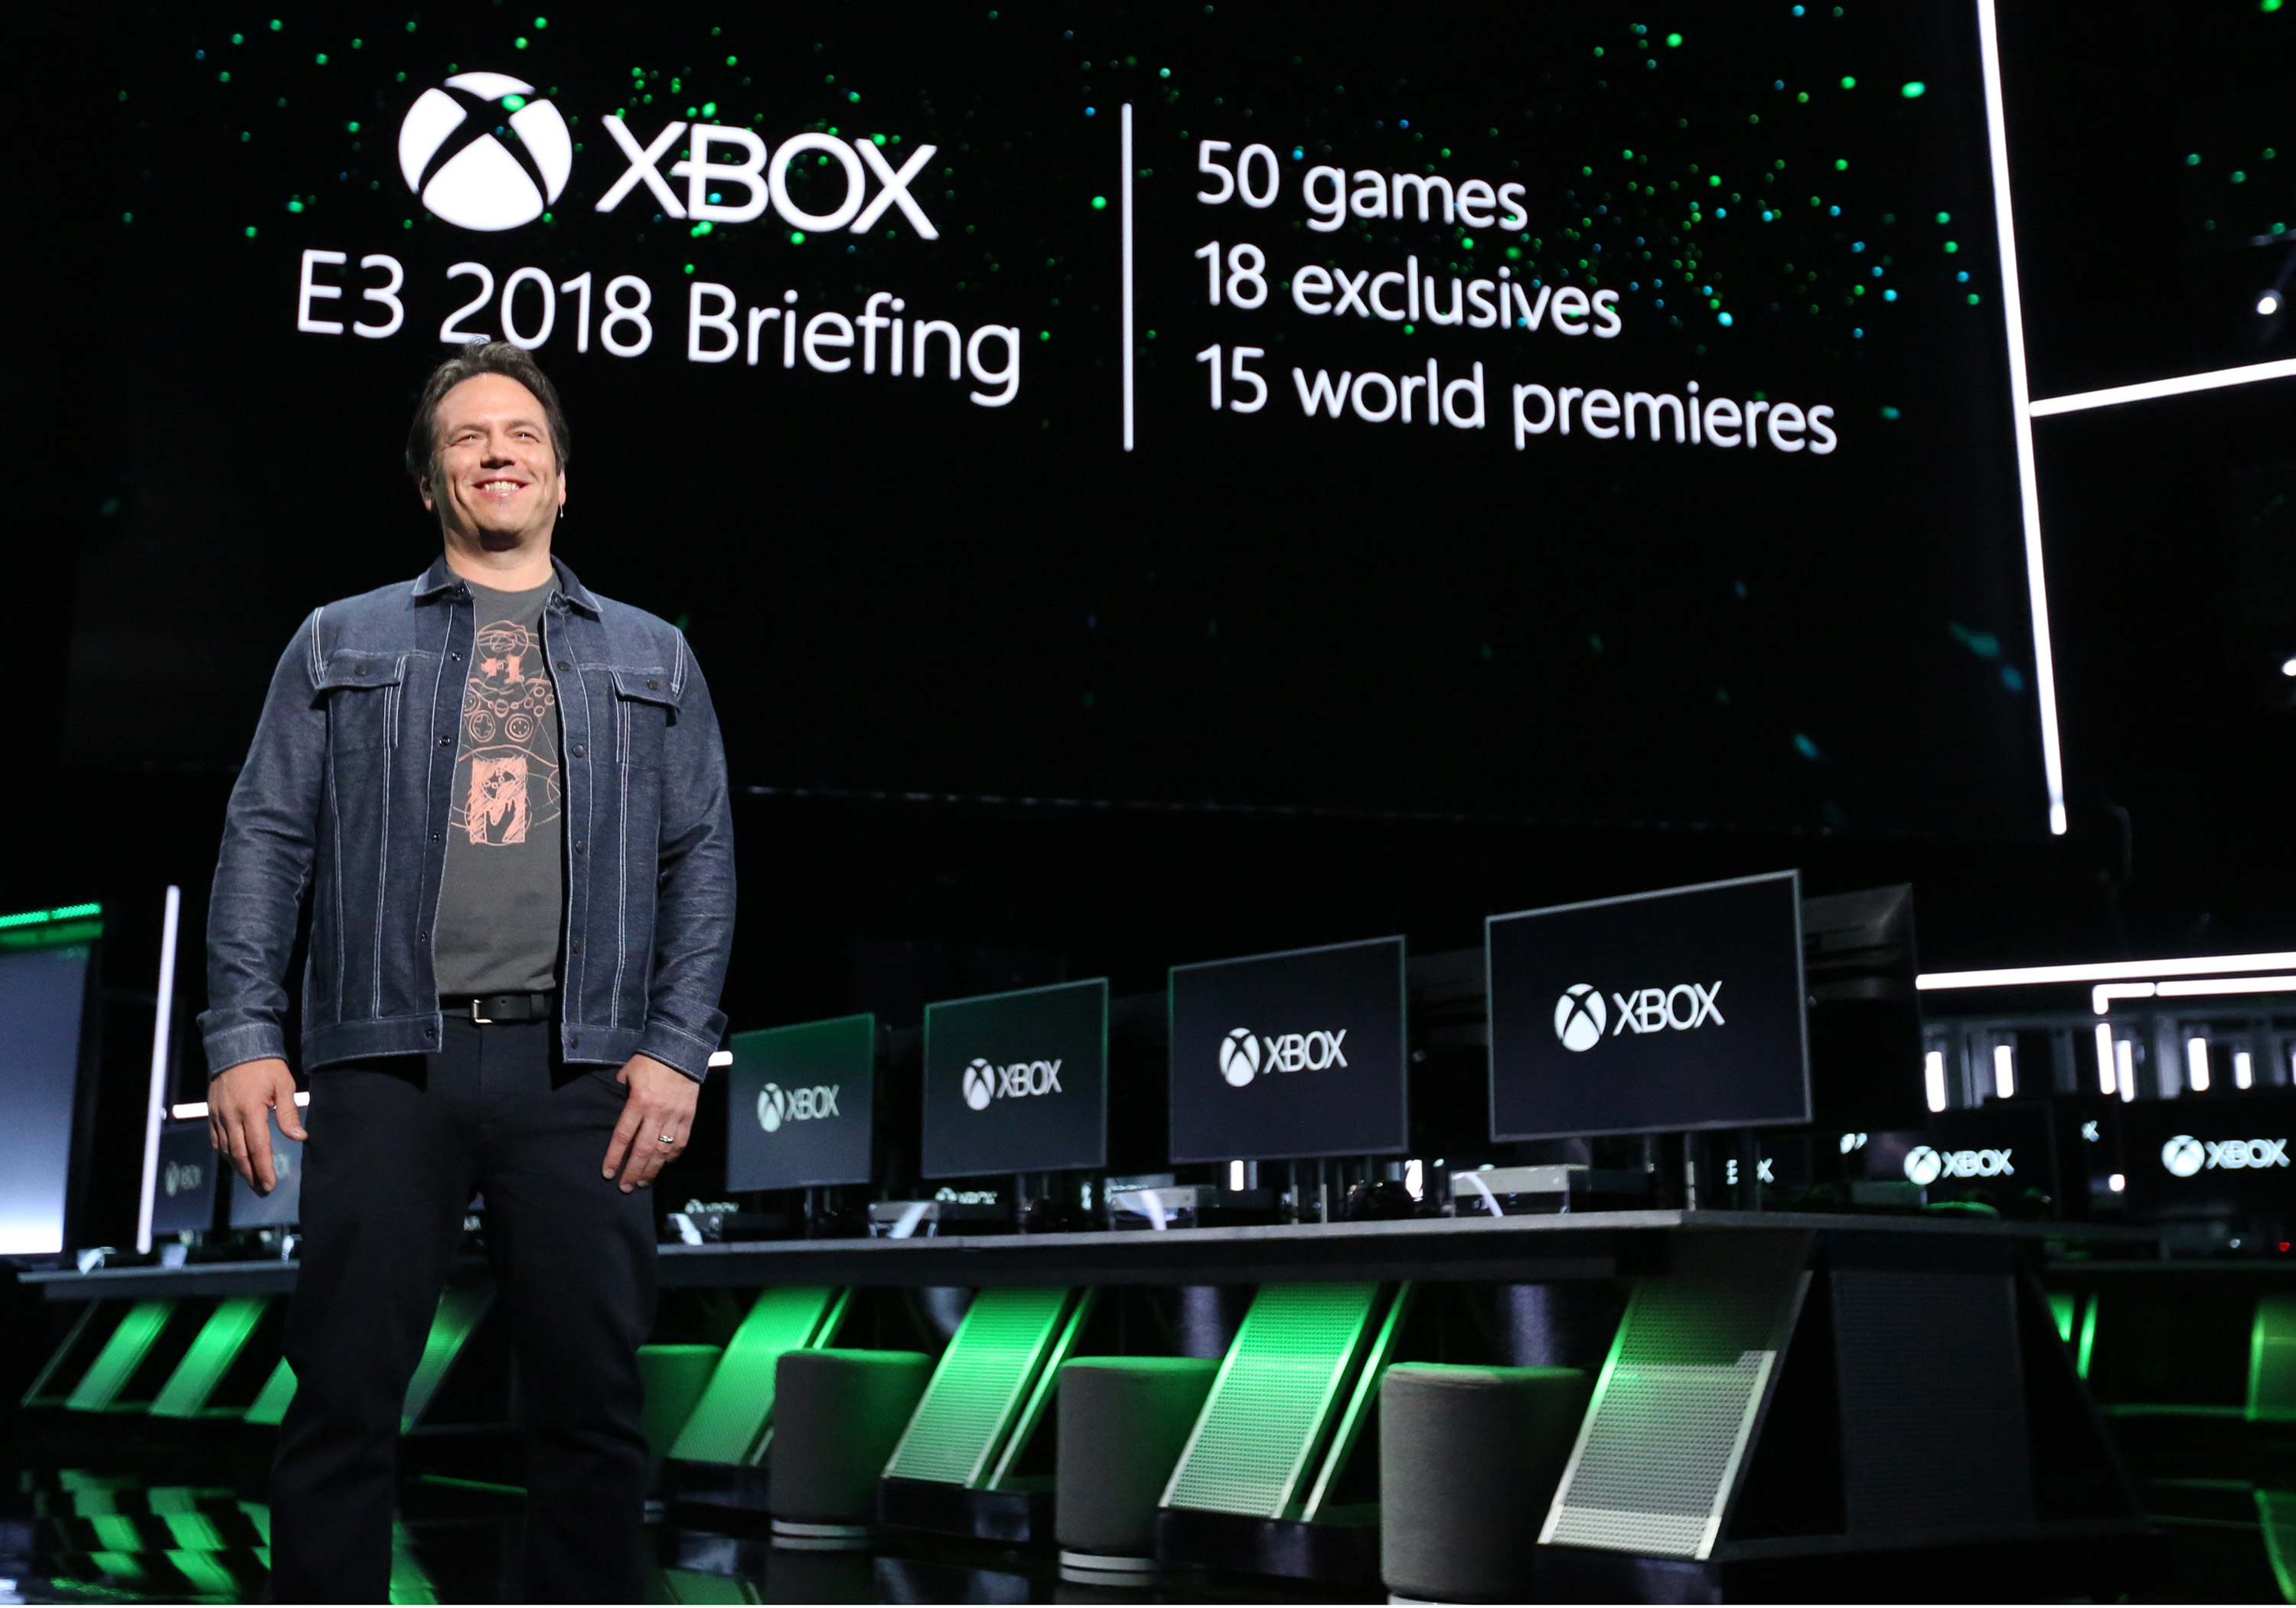 343 Industries on LinkedIn: Join Xbox Game Studios experts